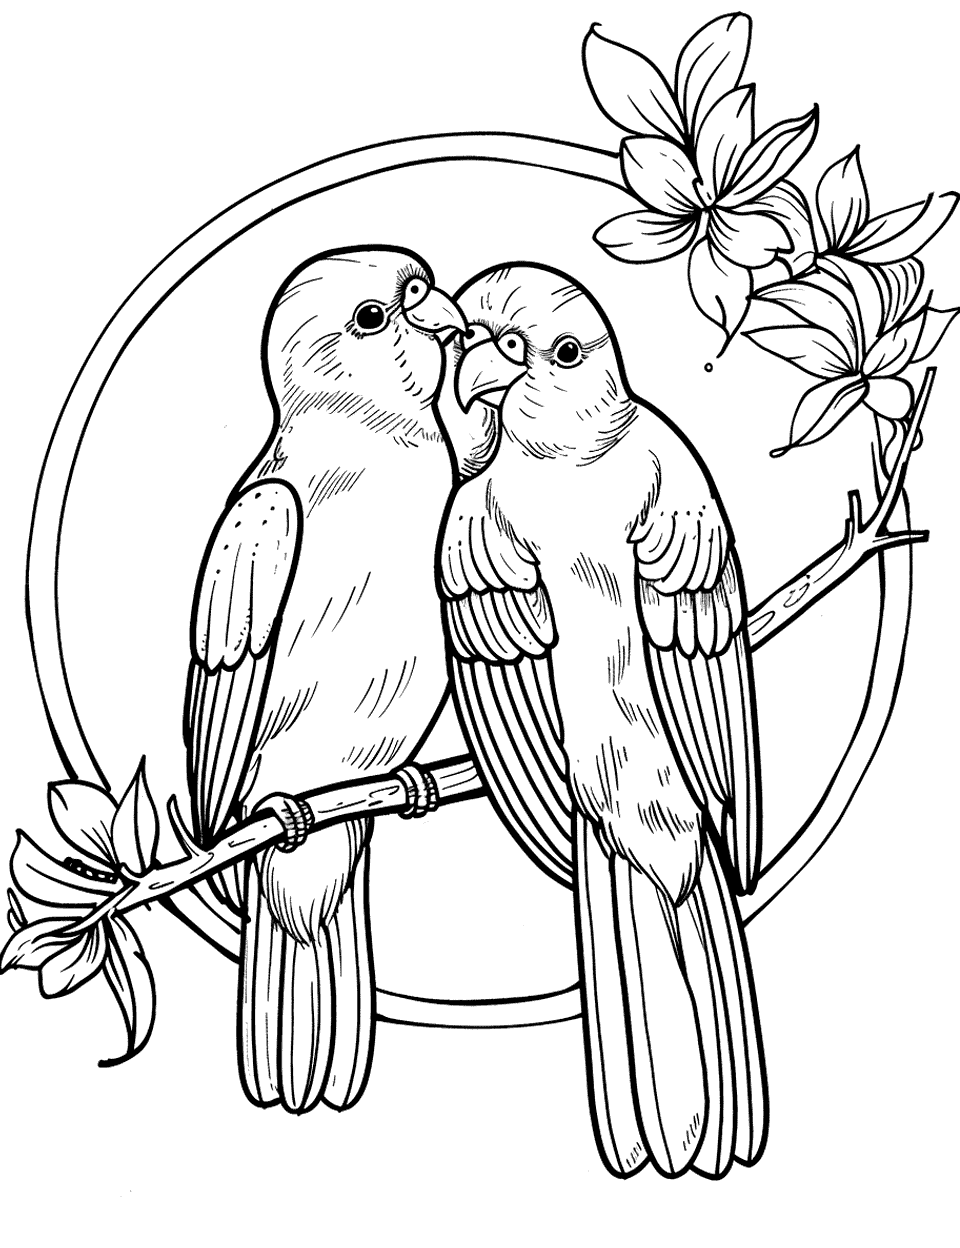 Love Birds in a Simple Wreath Parrot Coloring Page - Two love birds nestled together inside a circular wreath.